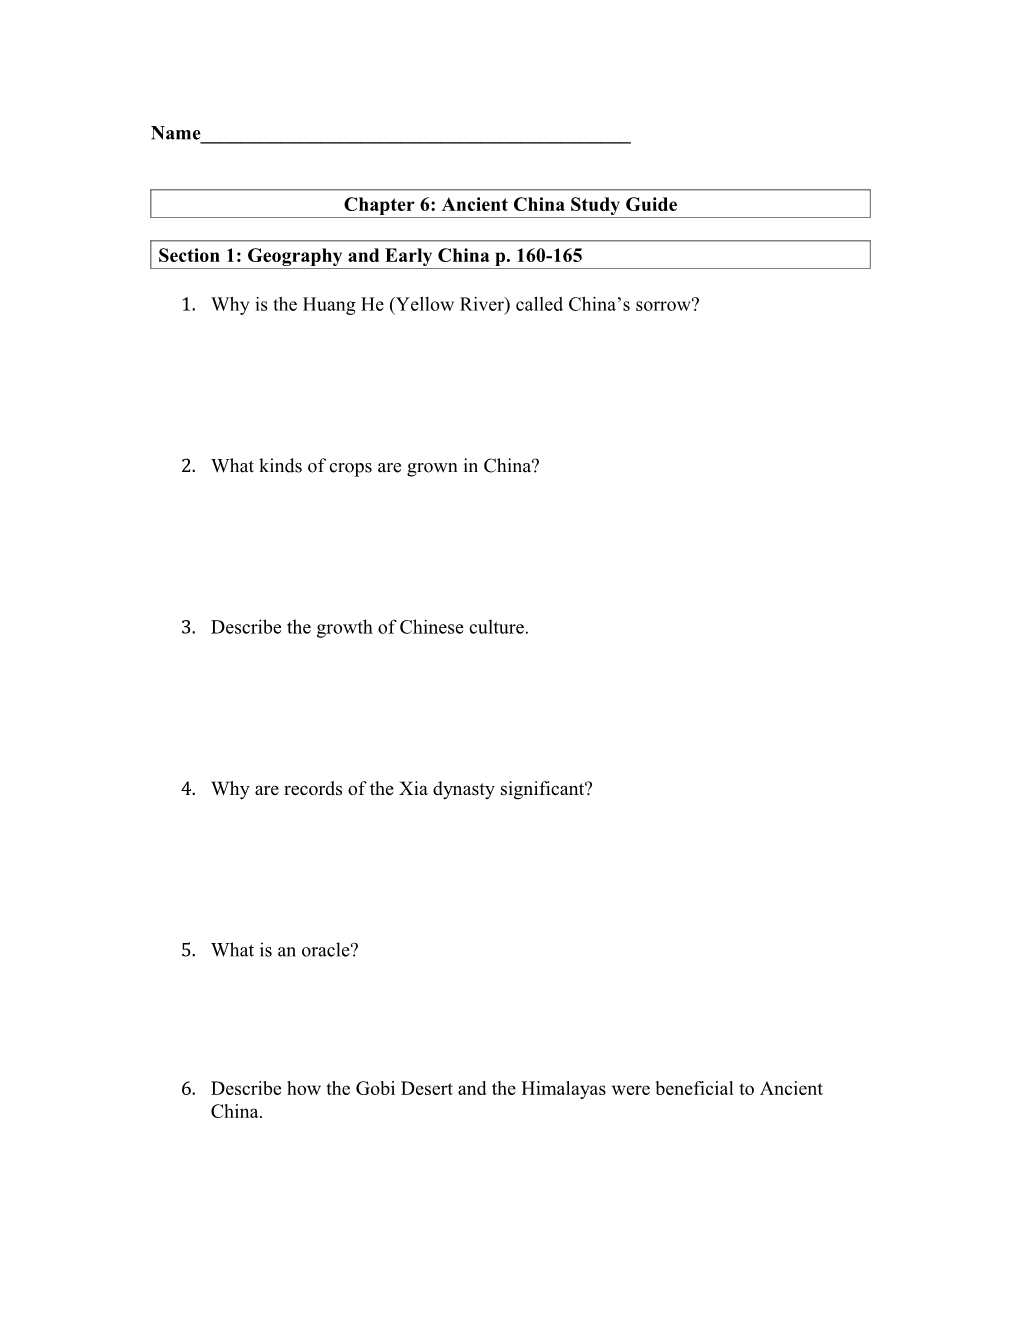 Chapter 6: Ancient China Study Guide